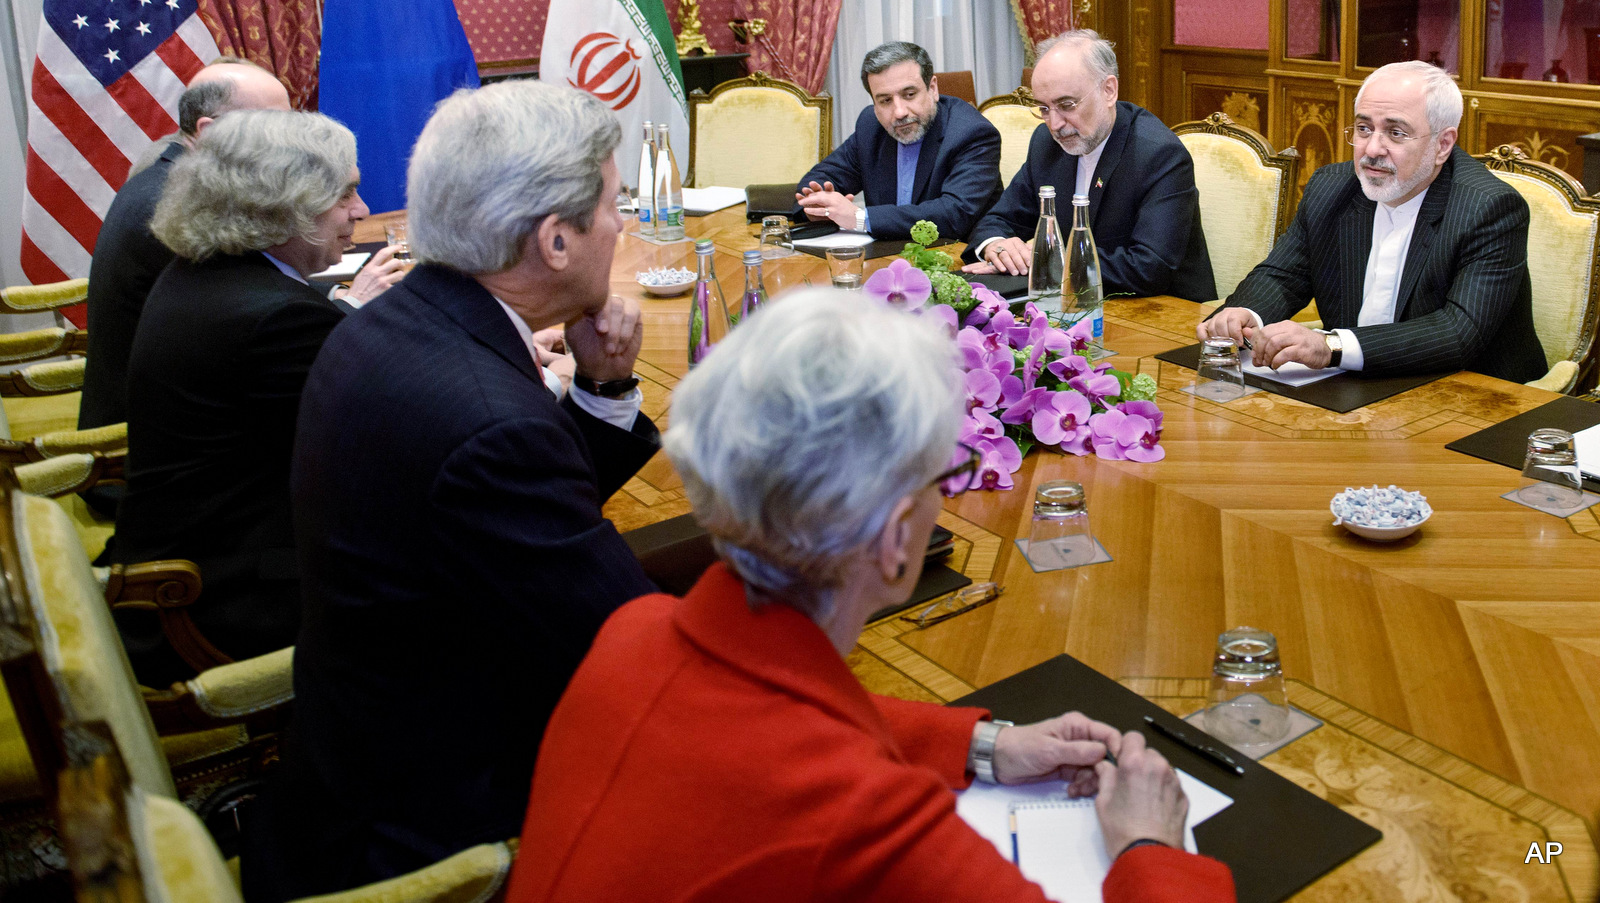 From left: Robert Malley, of the US National Security Council, US Secretary of Energy Ernest Moniz, US Secretary of State John Kerry, US Under Secretary for Political Affairs Wendy Sherman, Iranian Deputy Foreign Minister Abbas Araghchi, Head of Iranian Atomic Energy Organization Ali Akbar Salehi and Iranian Foreign Minister Mohammad Javad Zarif wait for a meeting, Friday, March 27, 2015 in Lausanne, Switzerland. The Iranian and US officials are in Switzerland to continue negotiations on the Iranian nuclear program. (AP Photo/Brendan Smialowski, Pool)